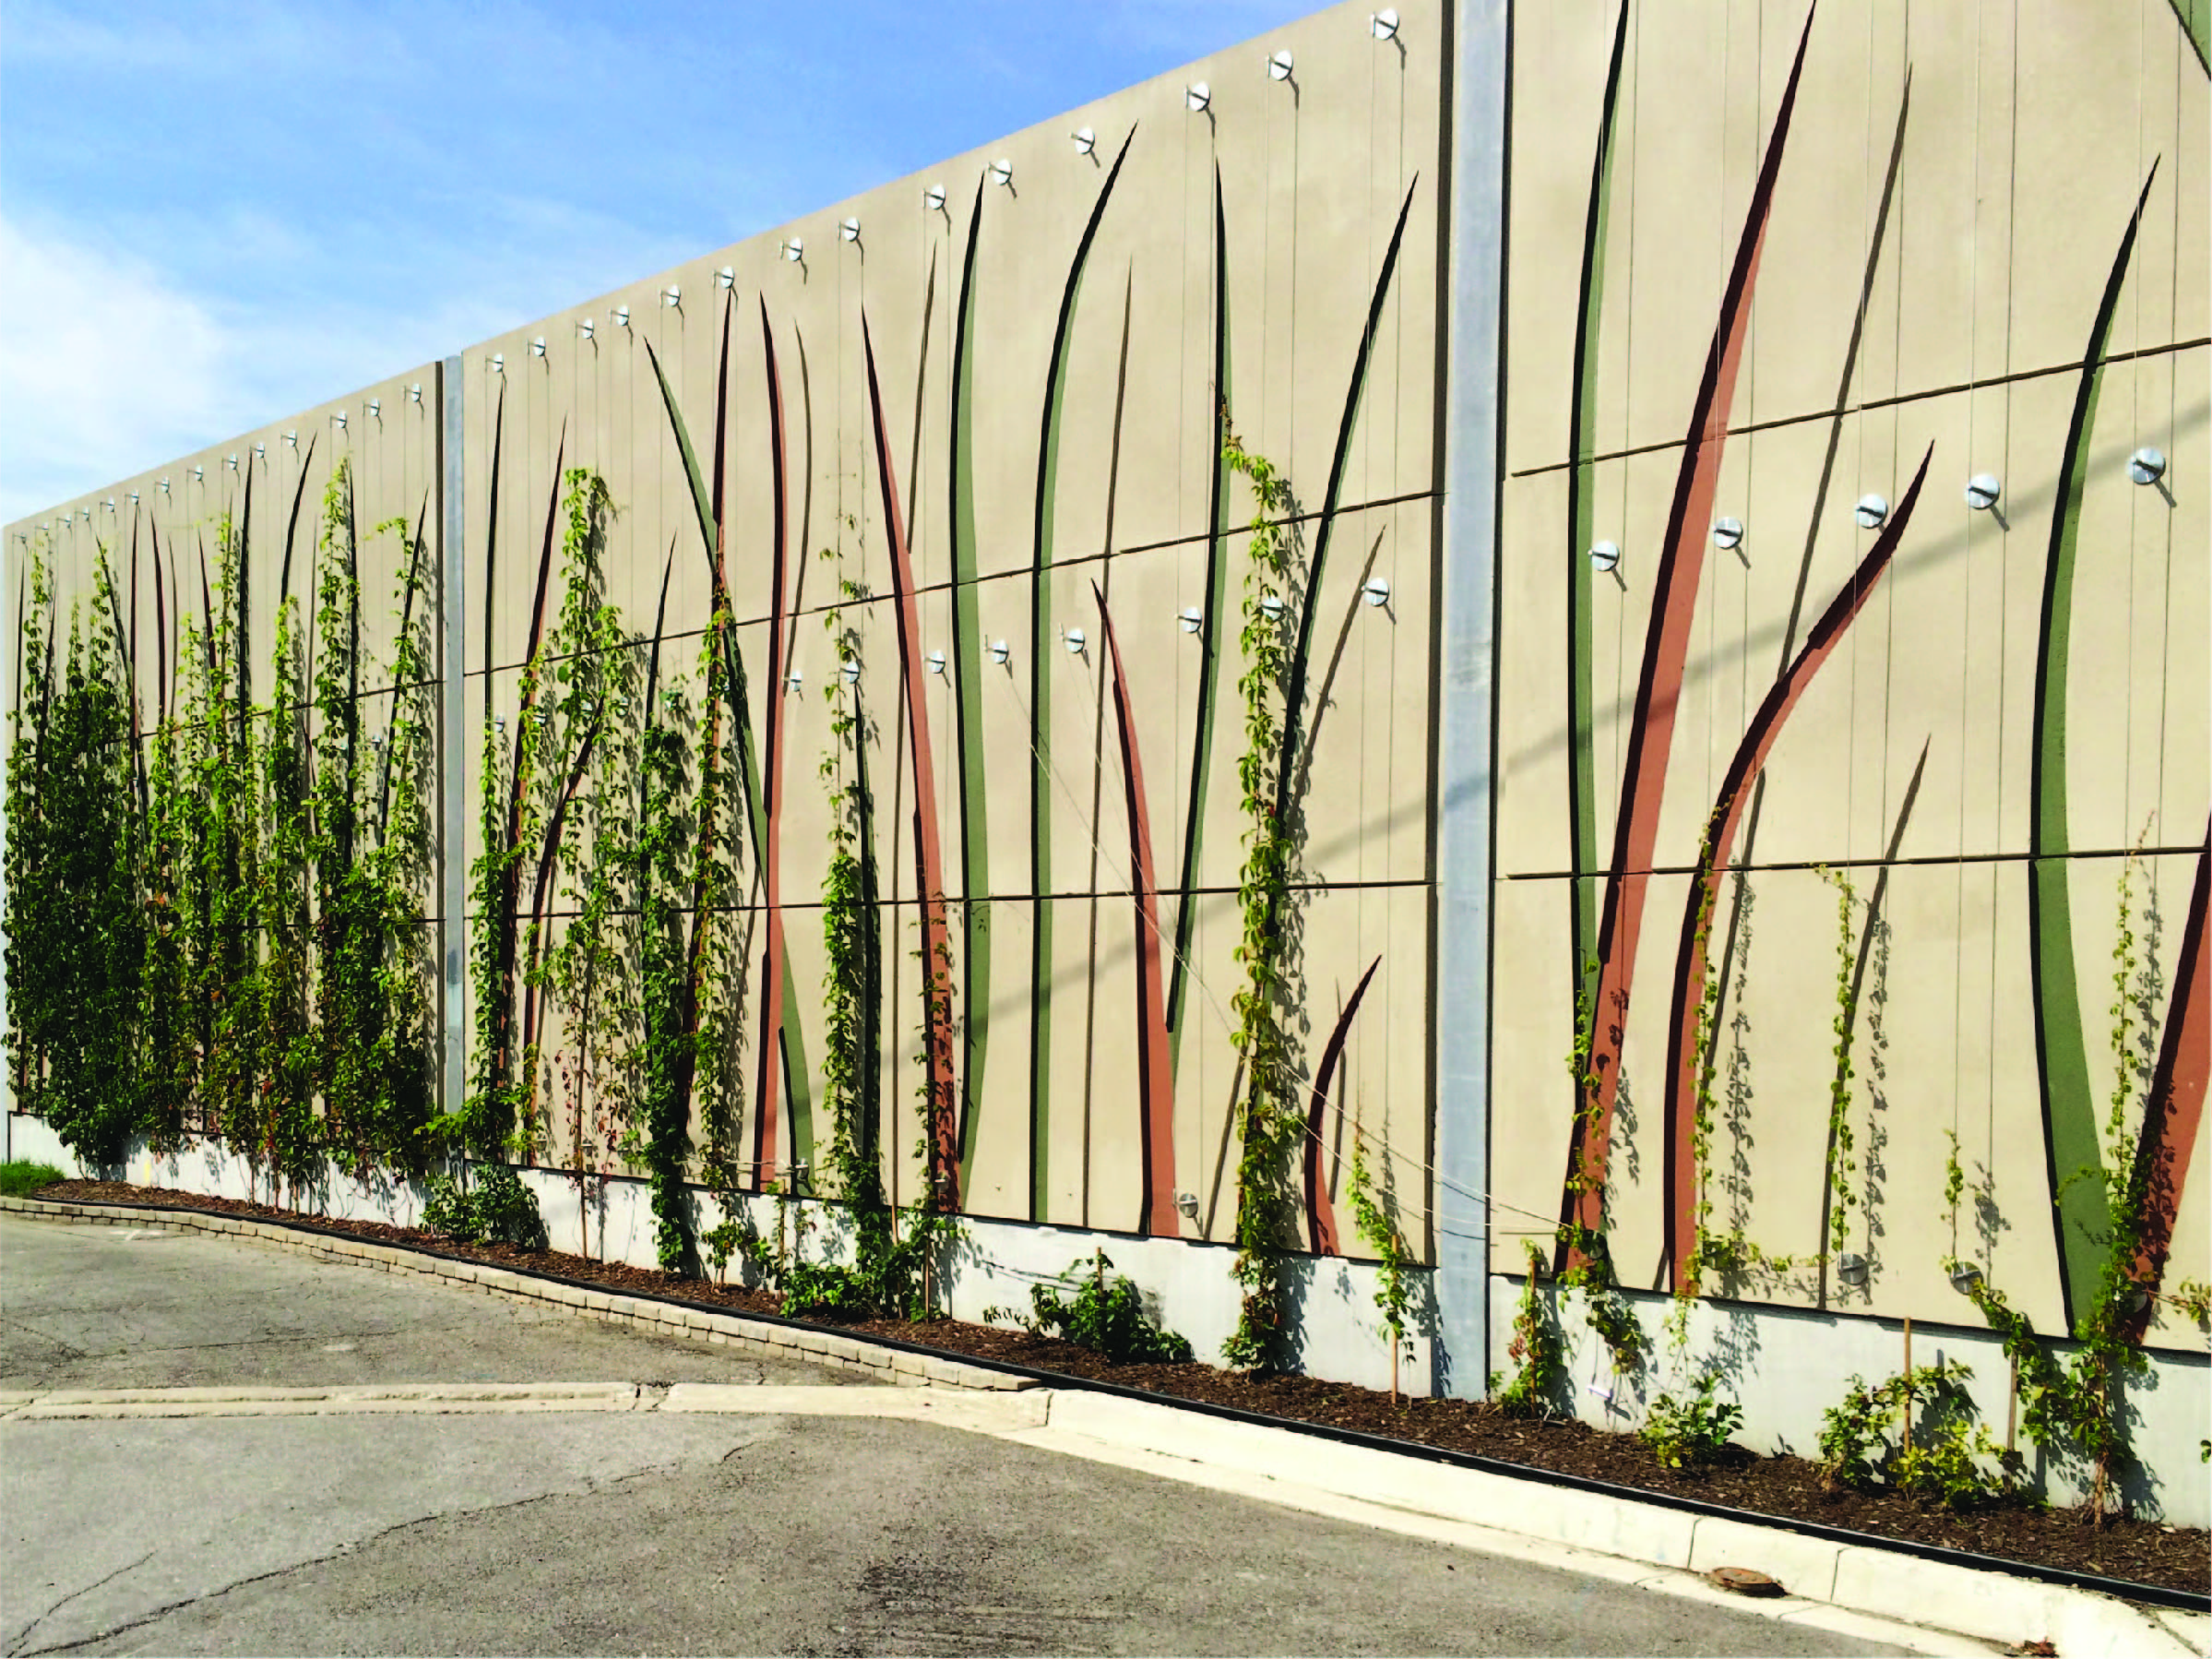 Noise barrier with Durisol absorptive panels featuring a custom "grasslands" pattern along Metrolinx's Union Pearson Express rail line in Toronto, ON.